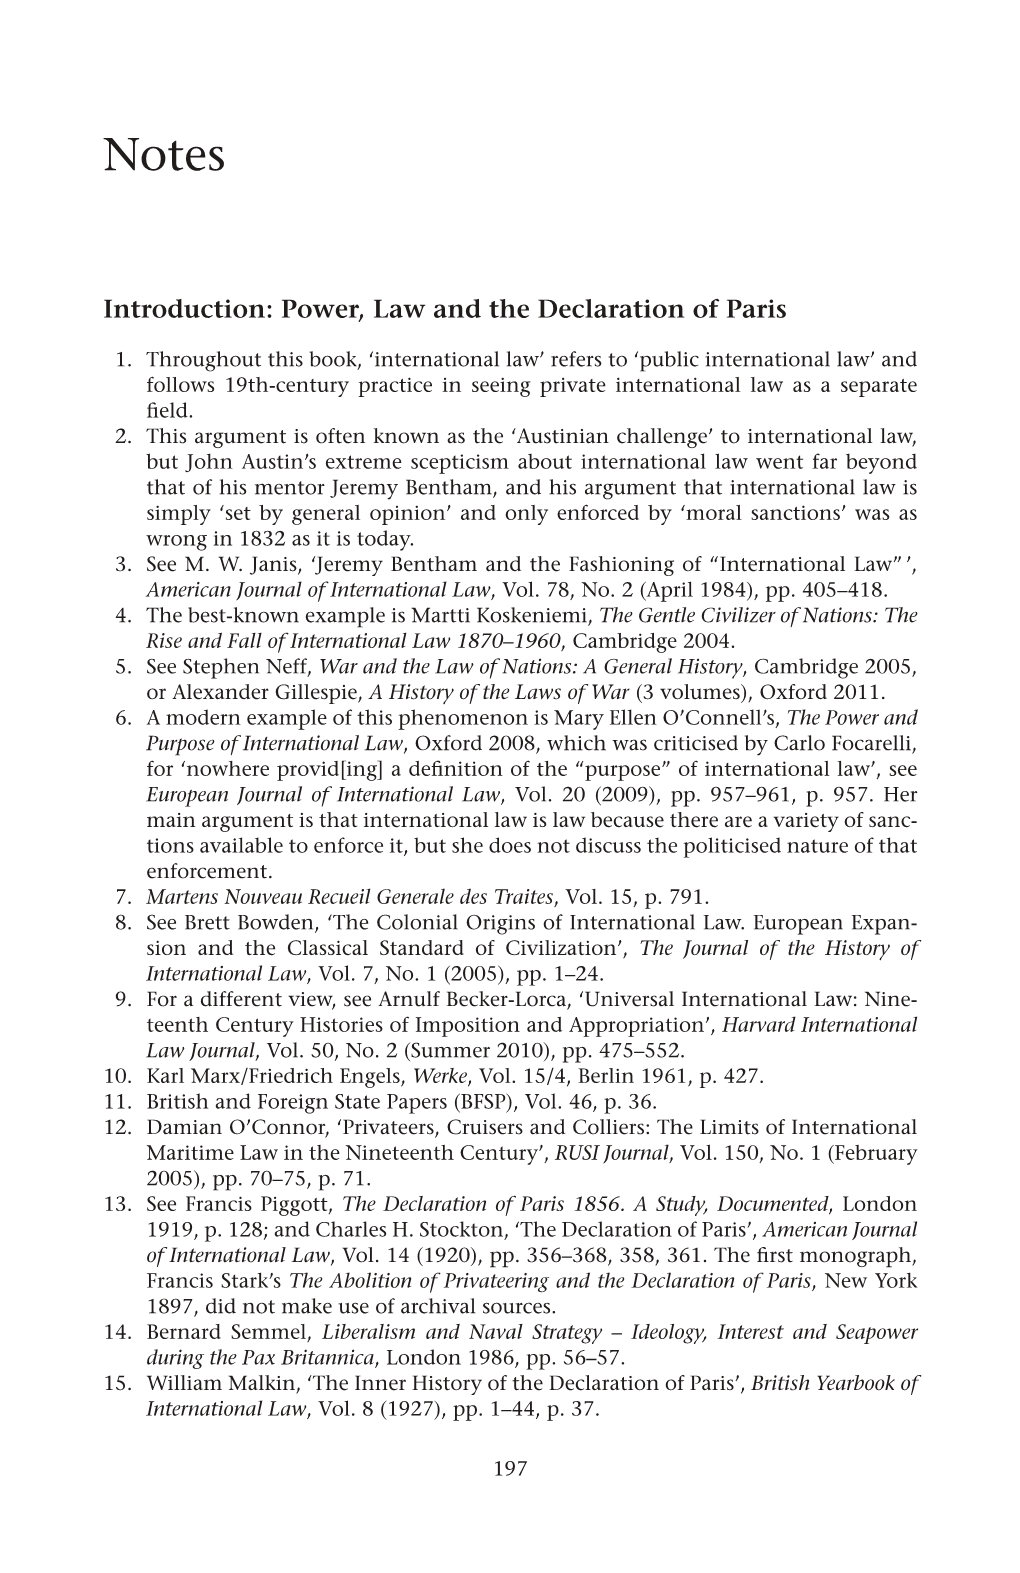 Introduction: Power, Law and the Declaration of Paris